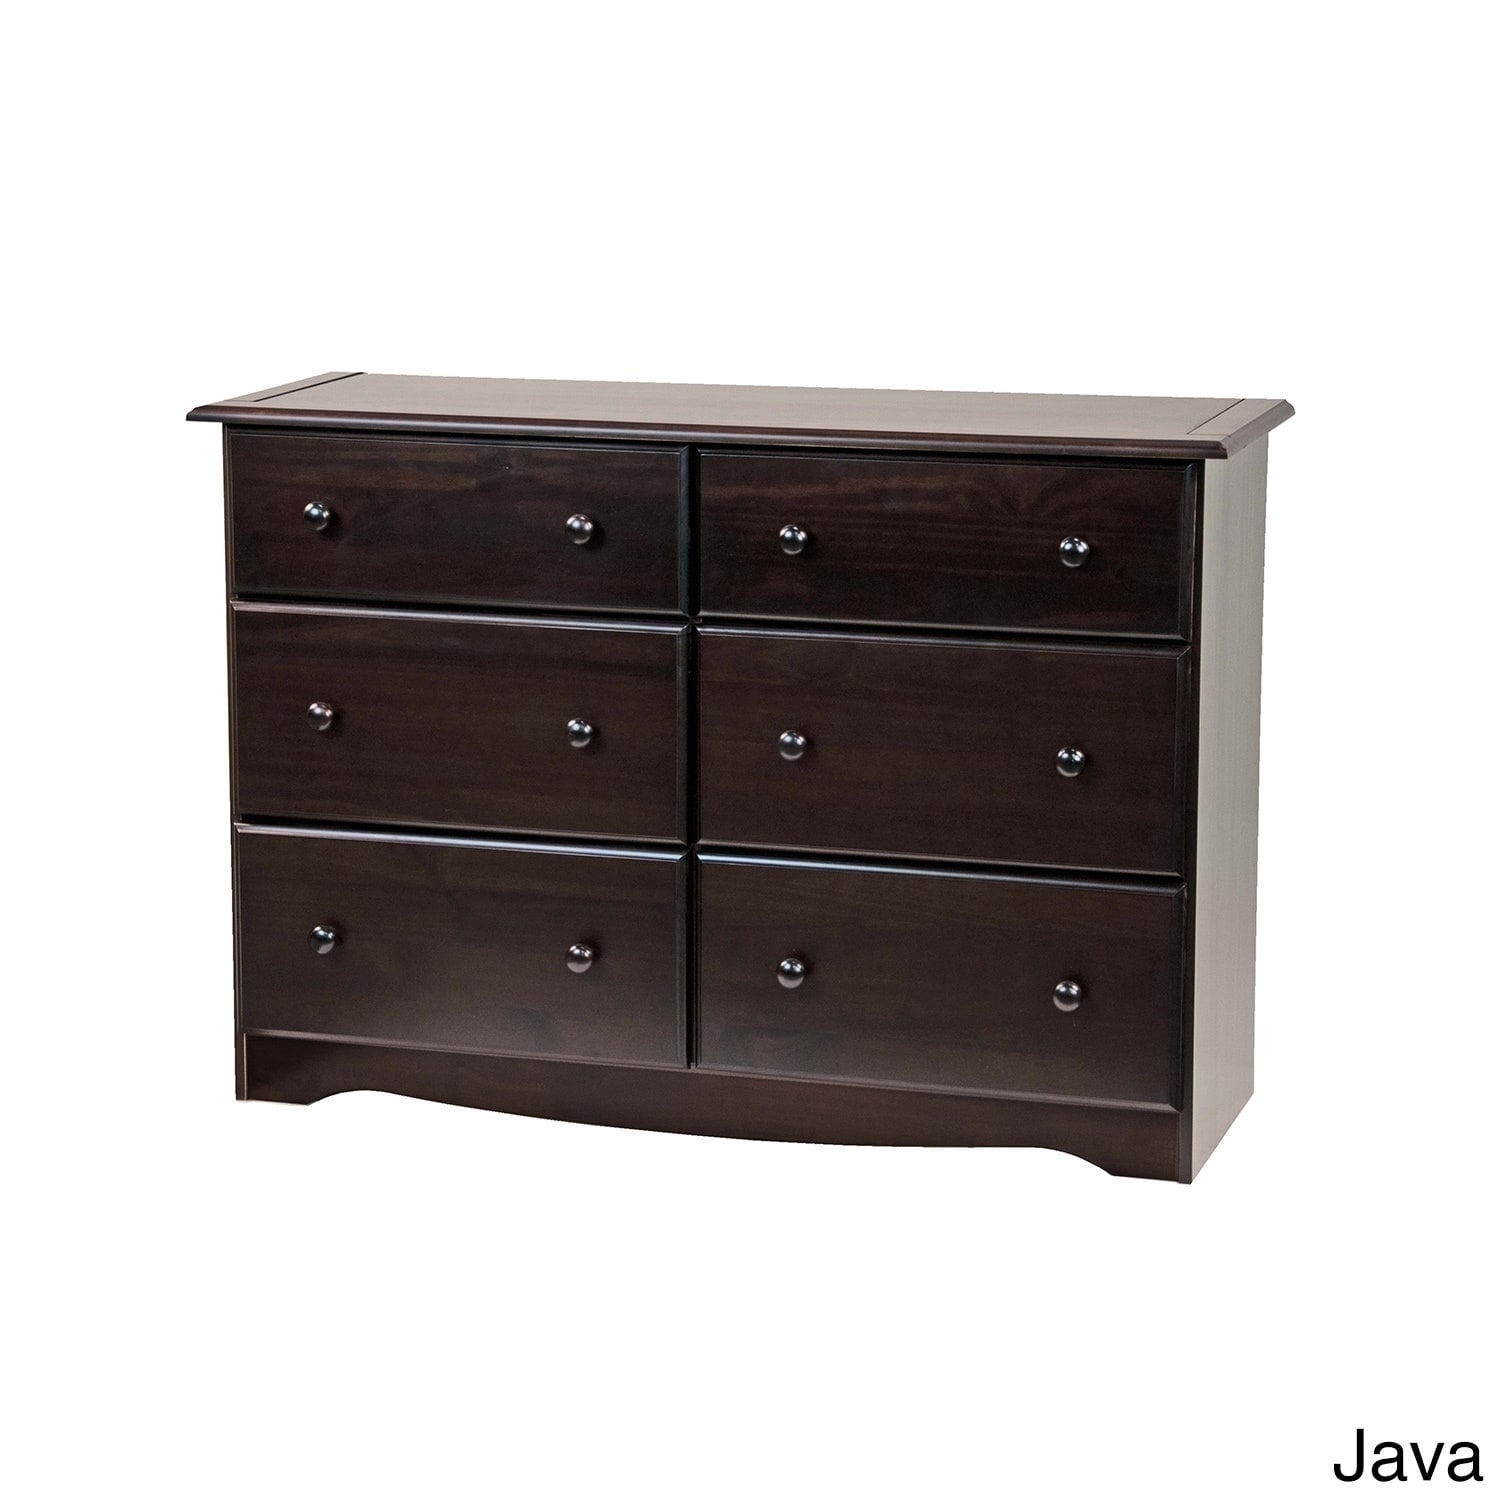 Shop Solid Wood 6 Drawer Double Dresser By Palace Imports